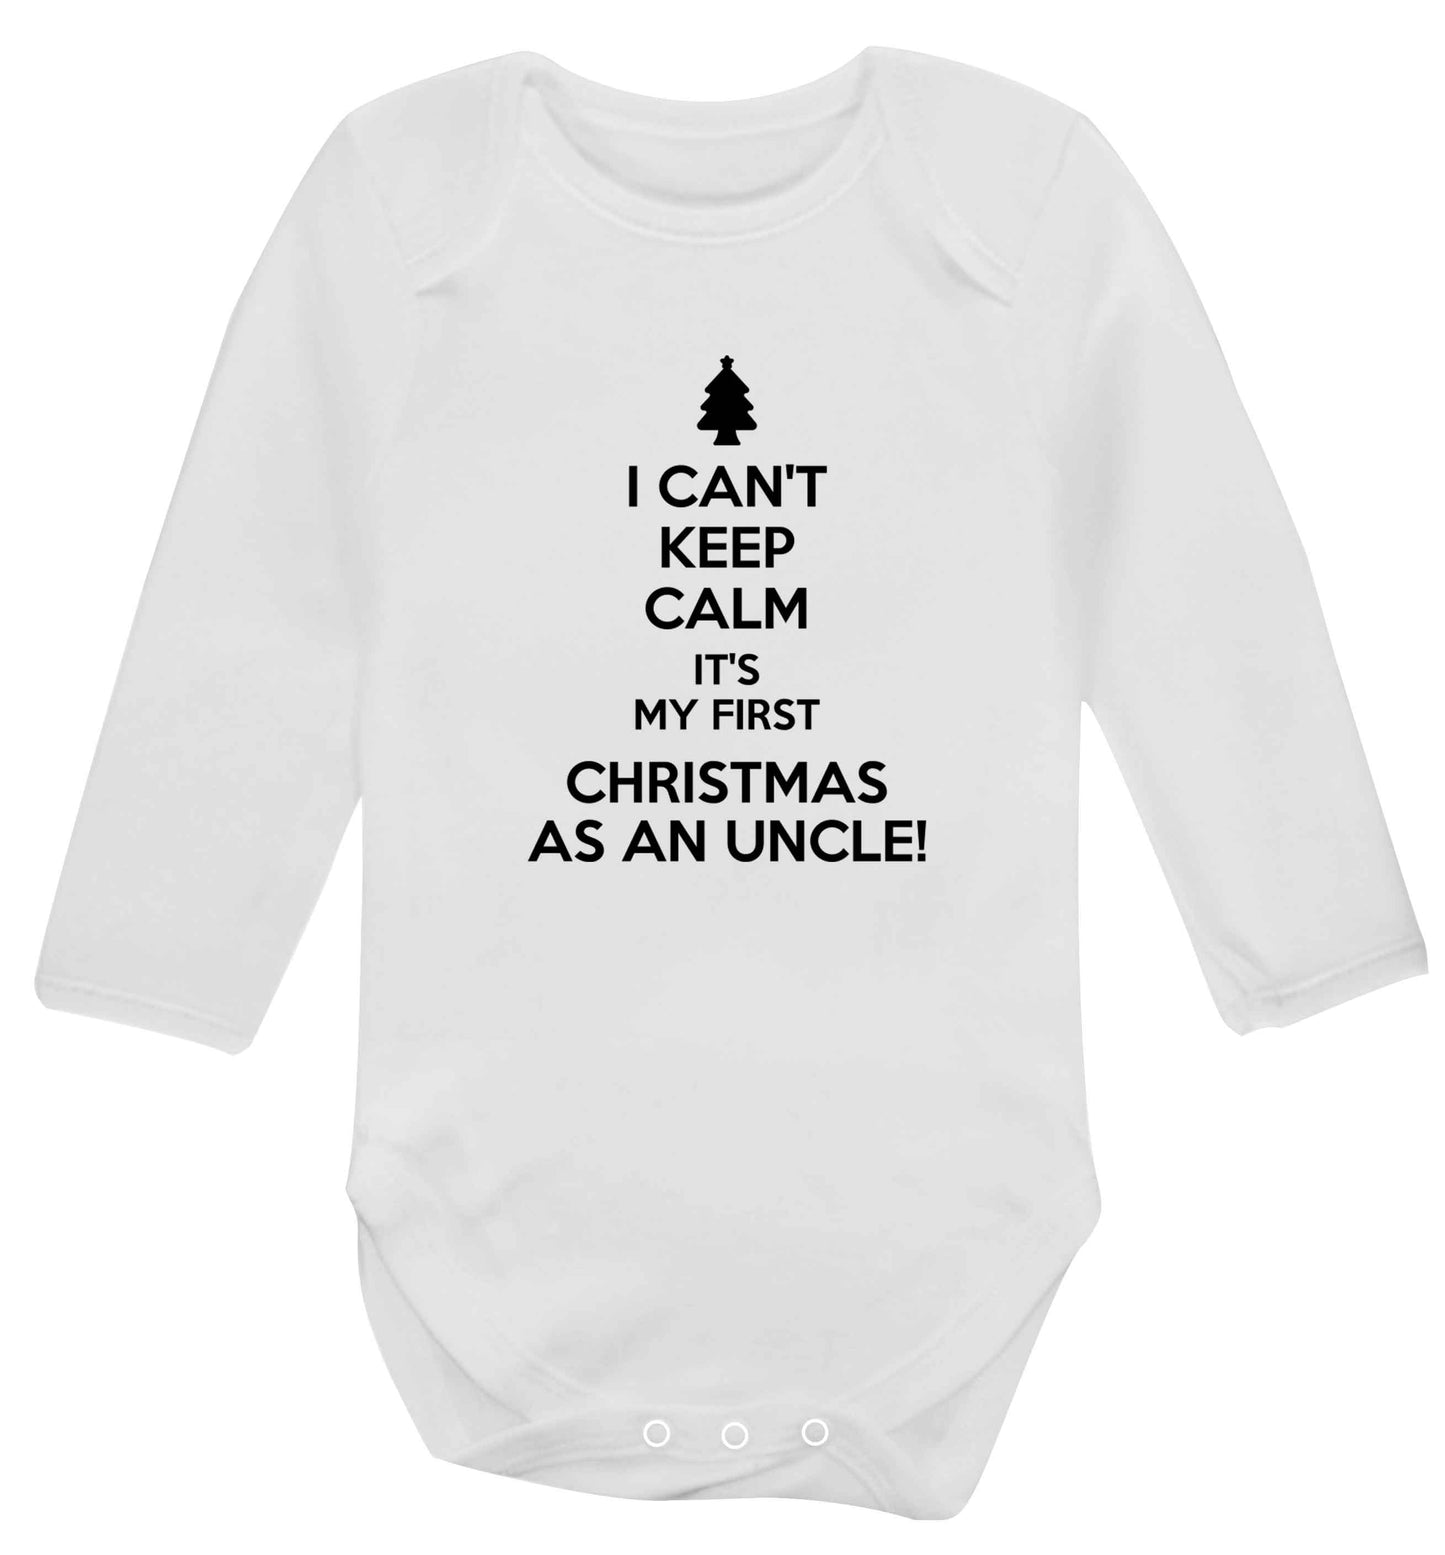 I can't keep calm it's my first Christmas as an uncle! Baby Vest long sleeved white 6-12 months